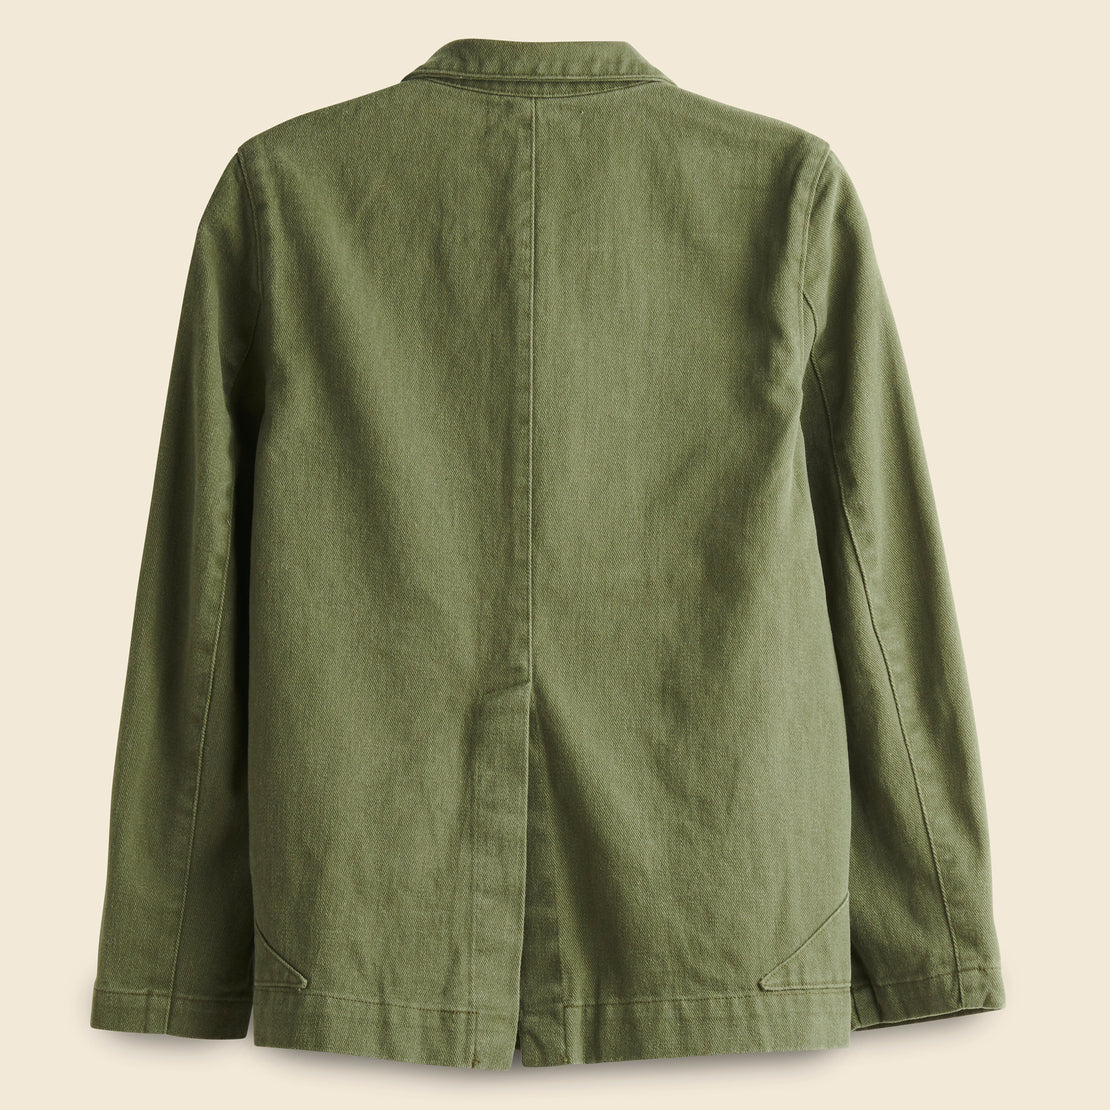 Triangle Pocket Jacket - Sage - Carleen - STAG Provisions - W - Outerwear - Coat/Jacket